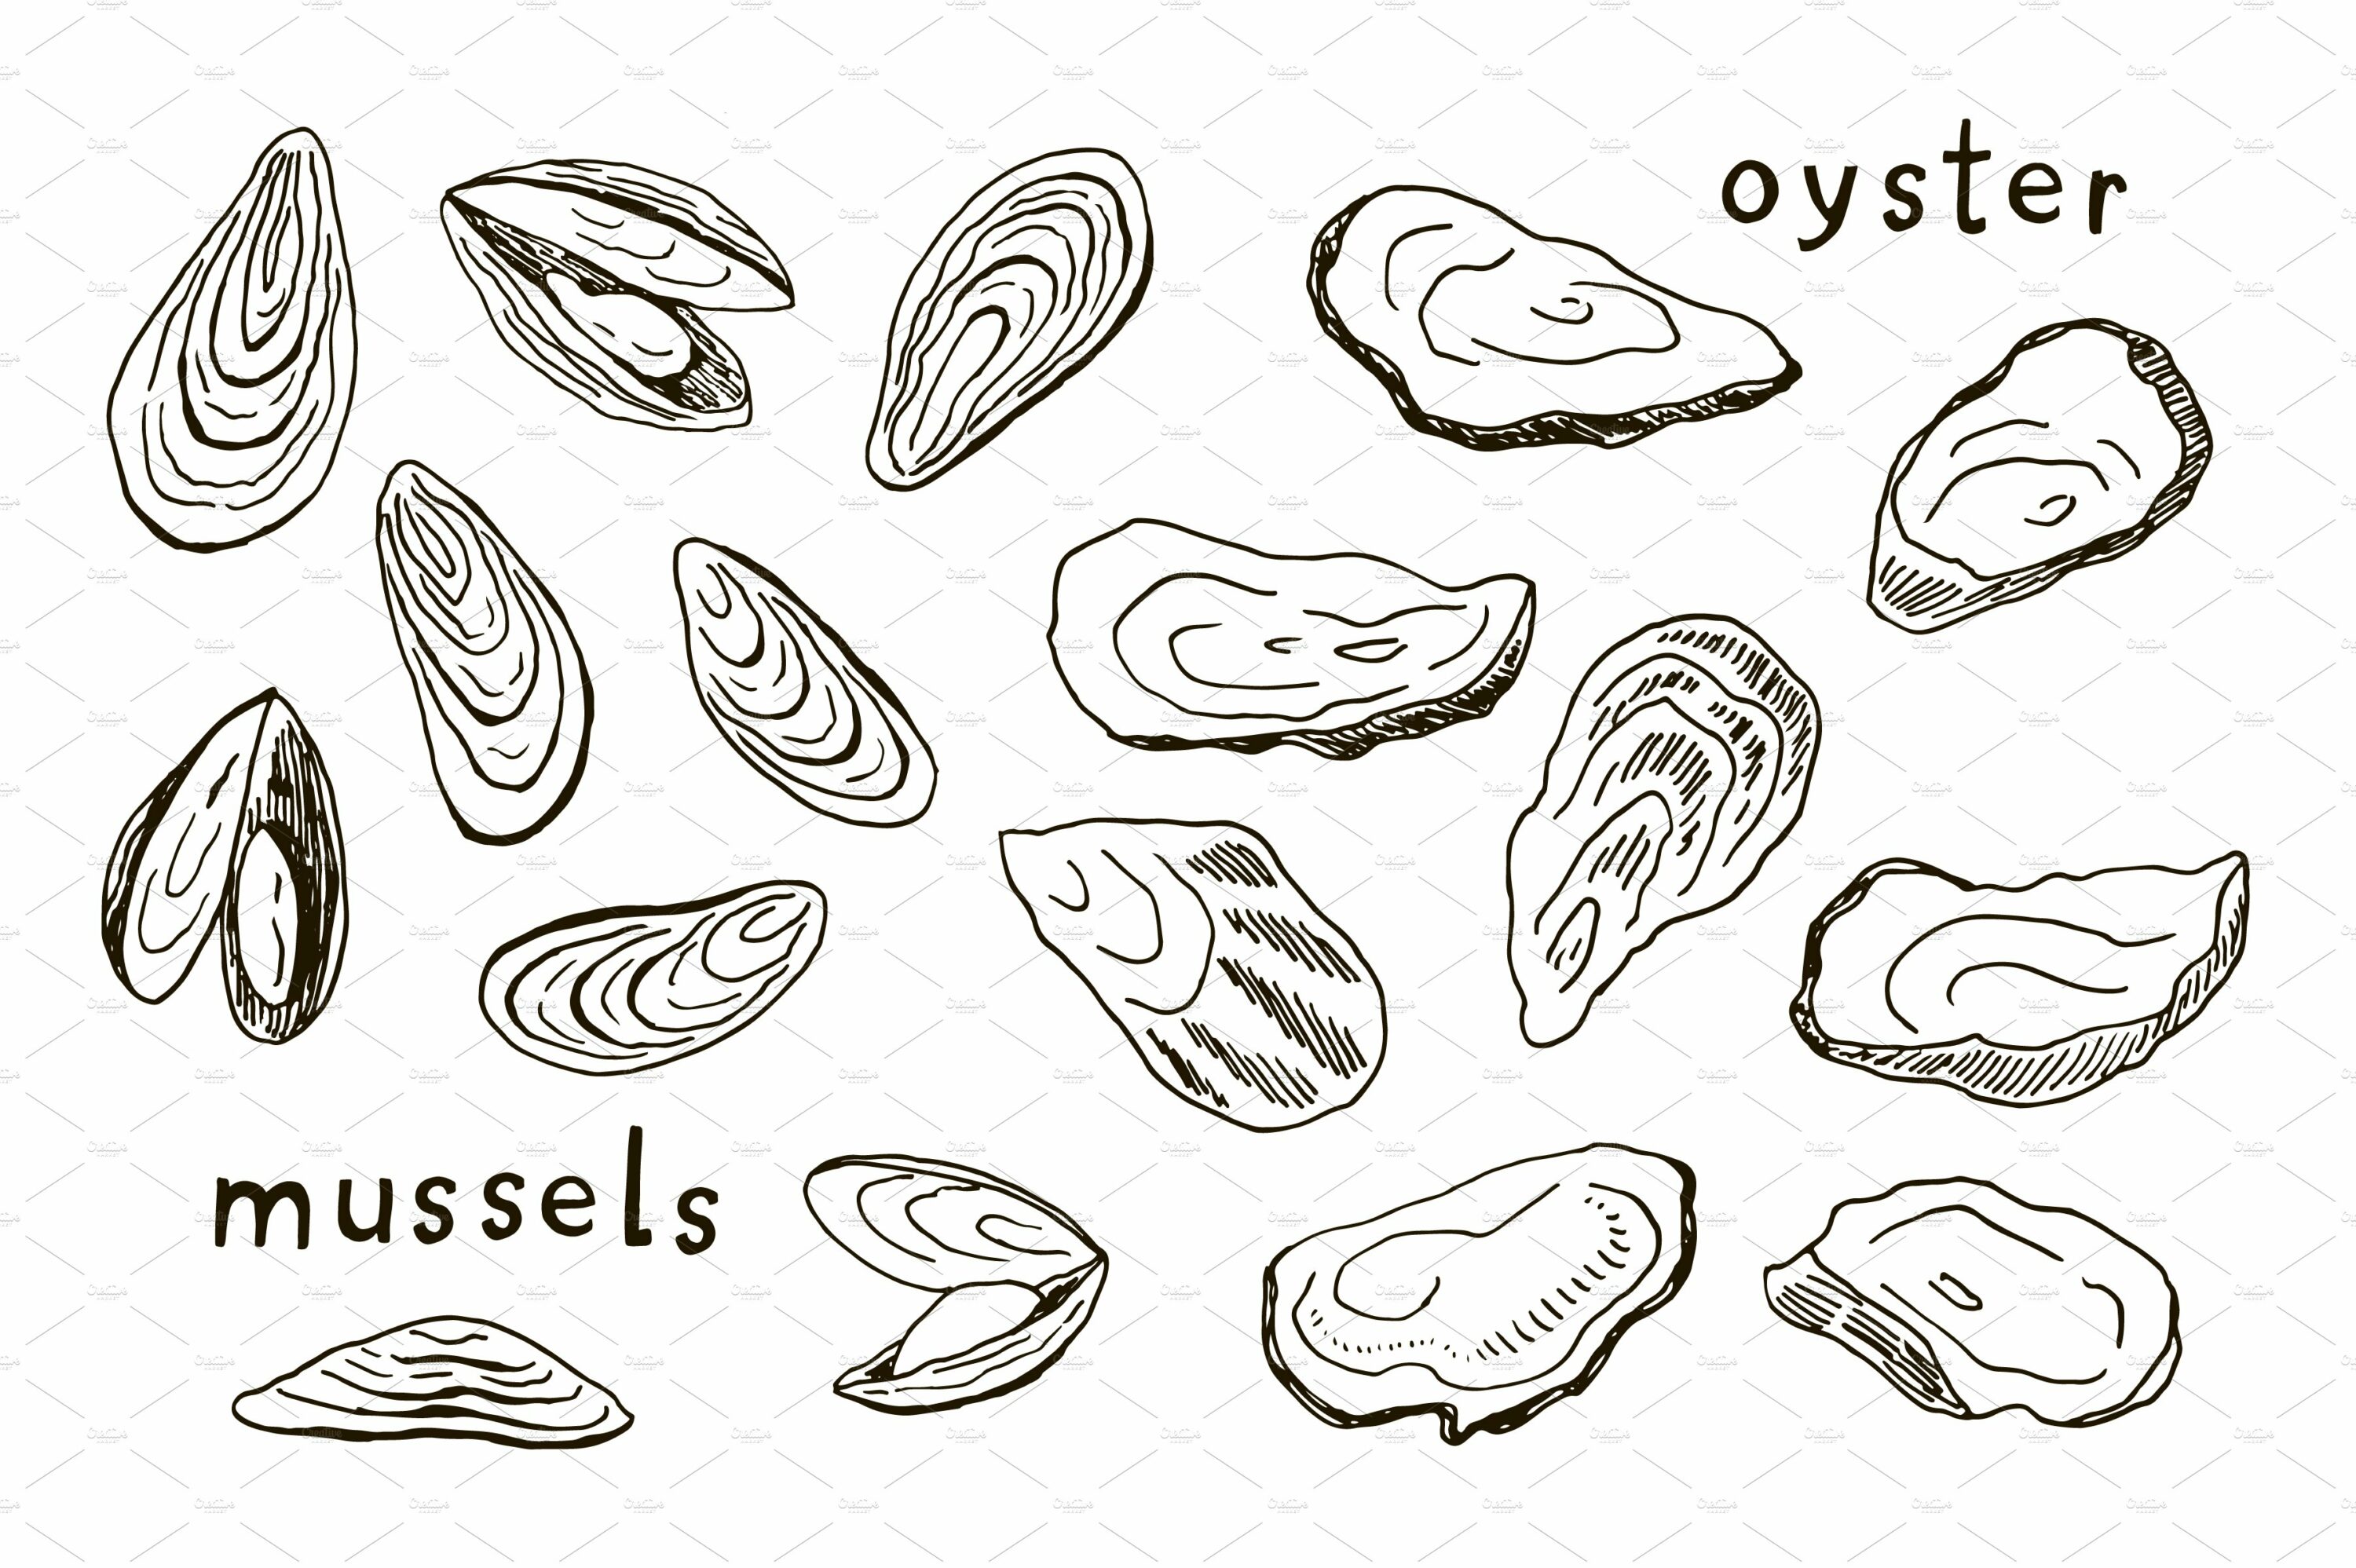 Outline mussels on a whit ebackground.